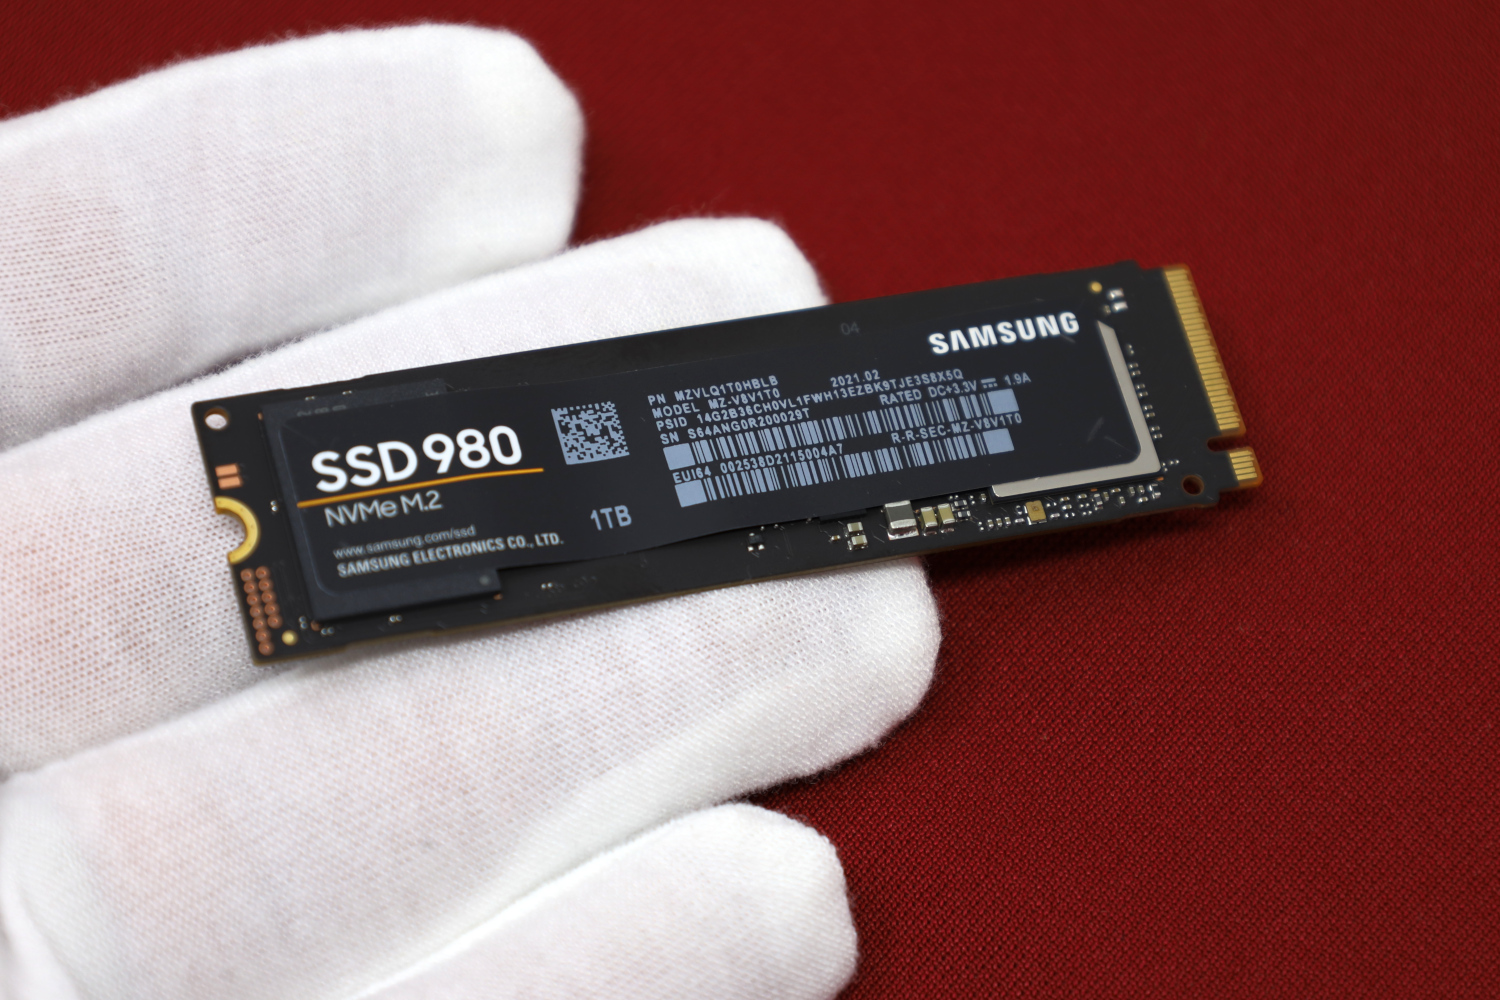 Samsung 980 M.2 NVMe SSD Review: Going DRAMless with V6 V-NAND (Updated)